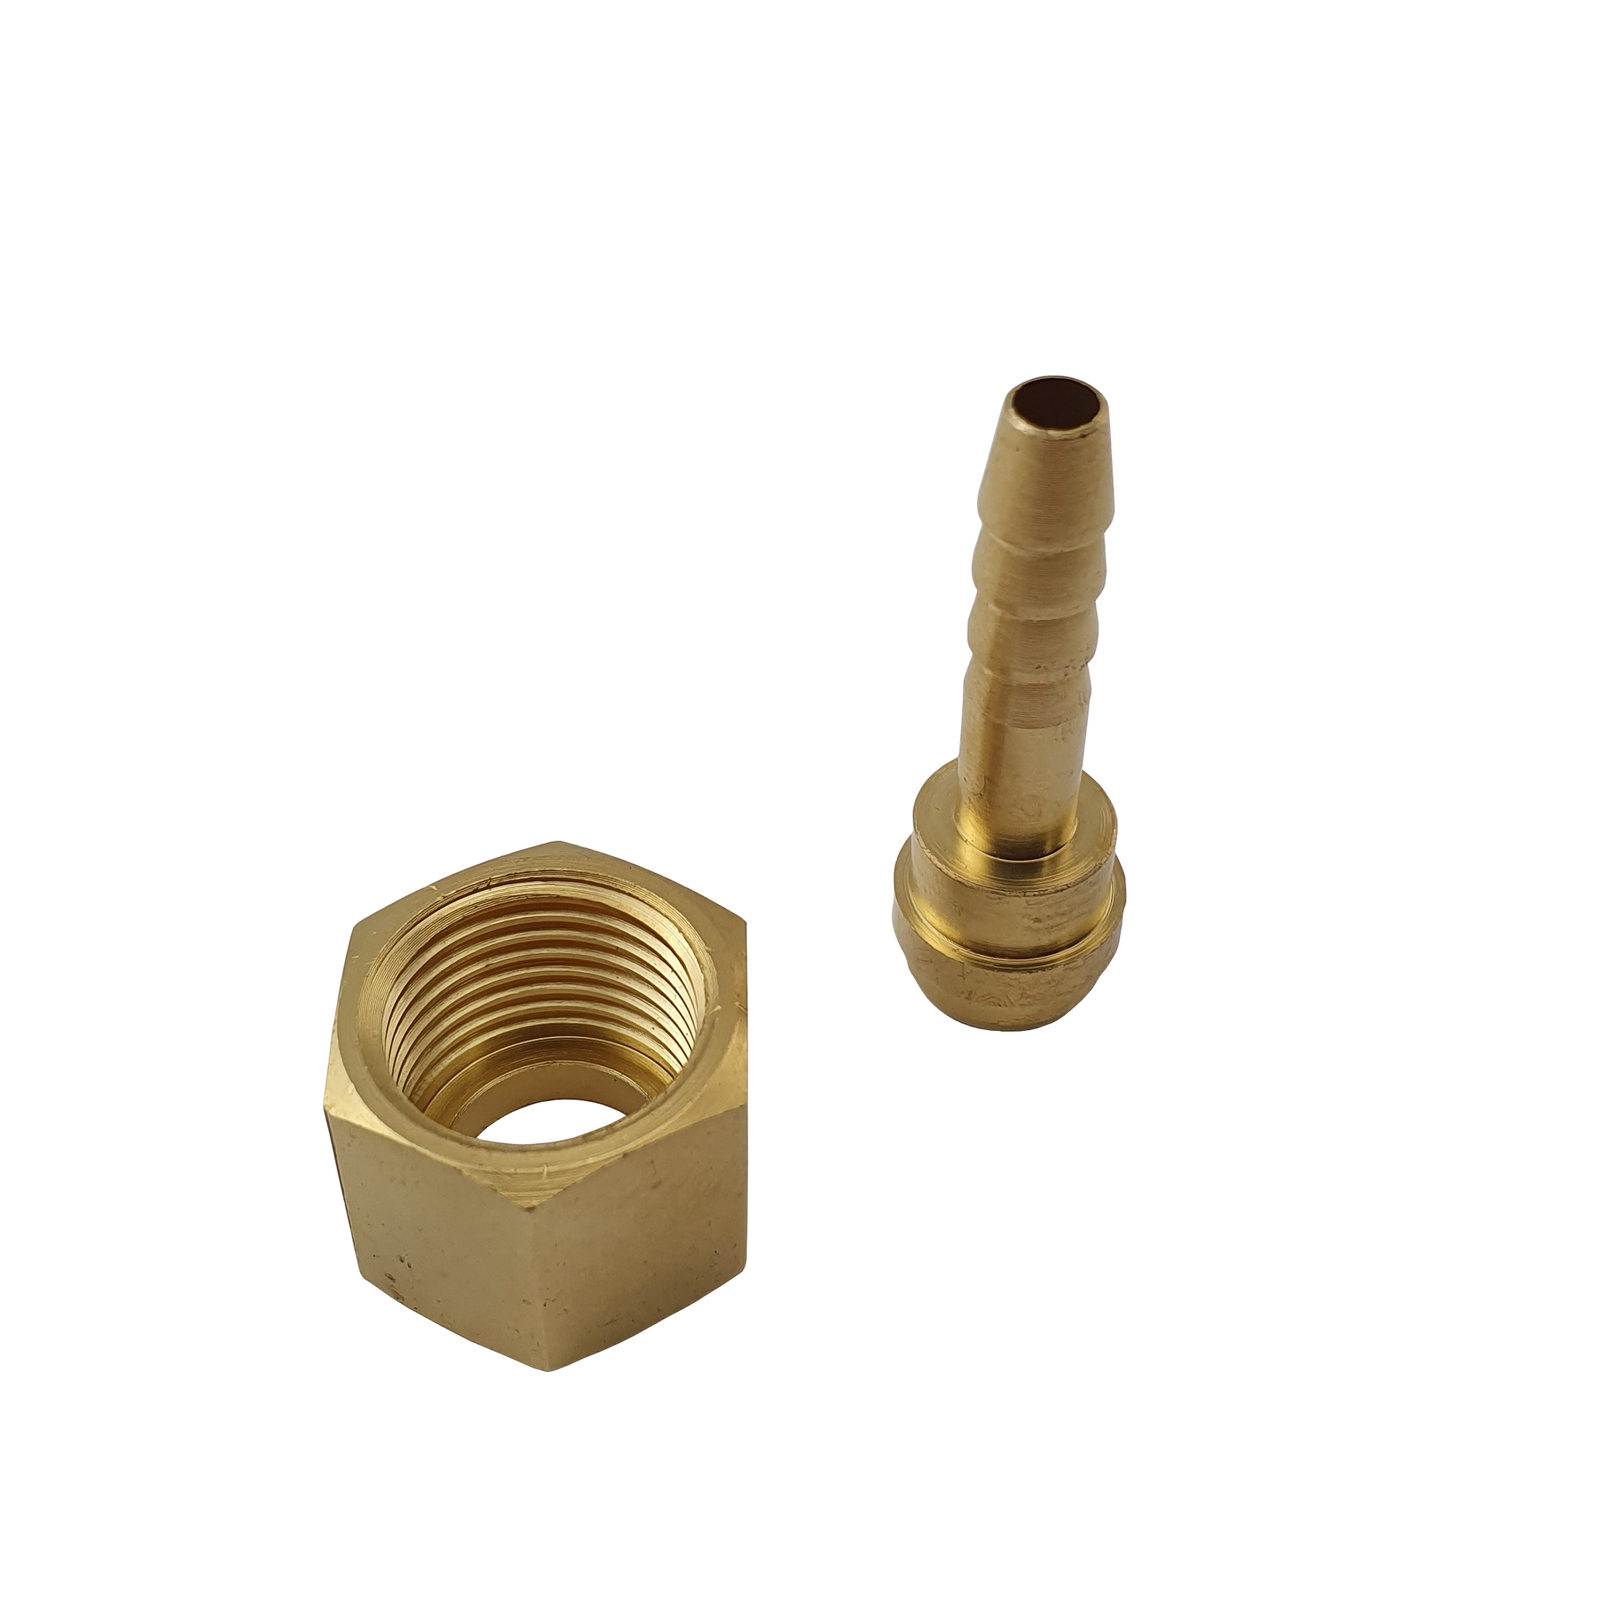 HongBoW Hardware 5 Pcs Brass Hose Fitting,Connector,Hose Barbed Adapter 3/8 Barb x 1/4 NPT Male Pipe Thread O.D: 0.54 